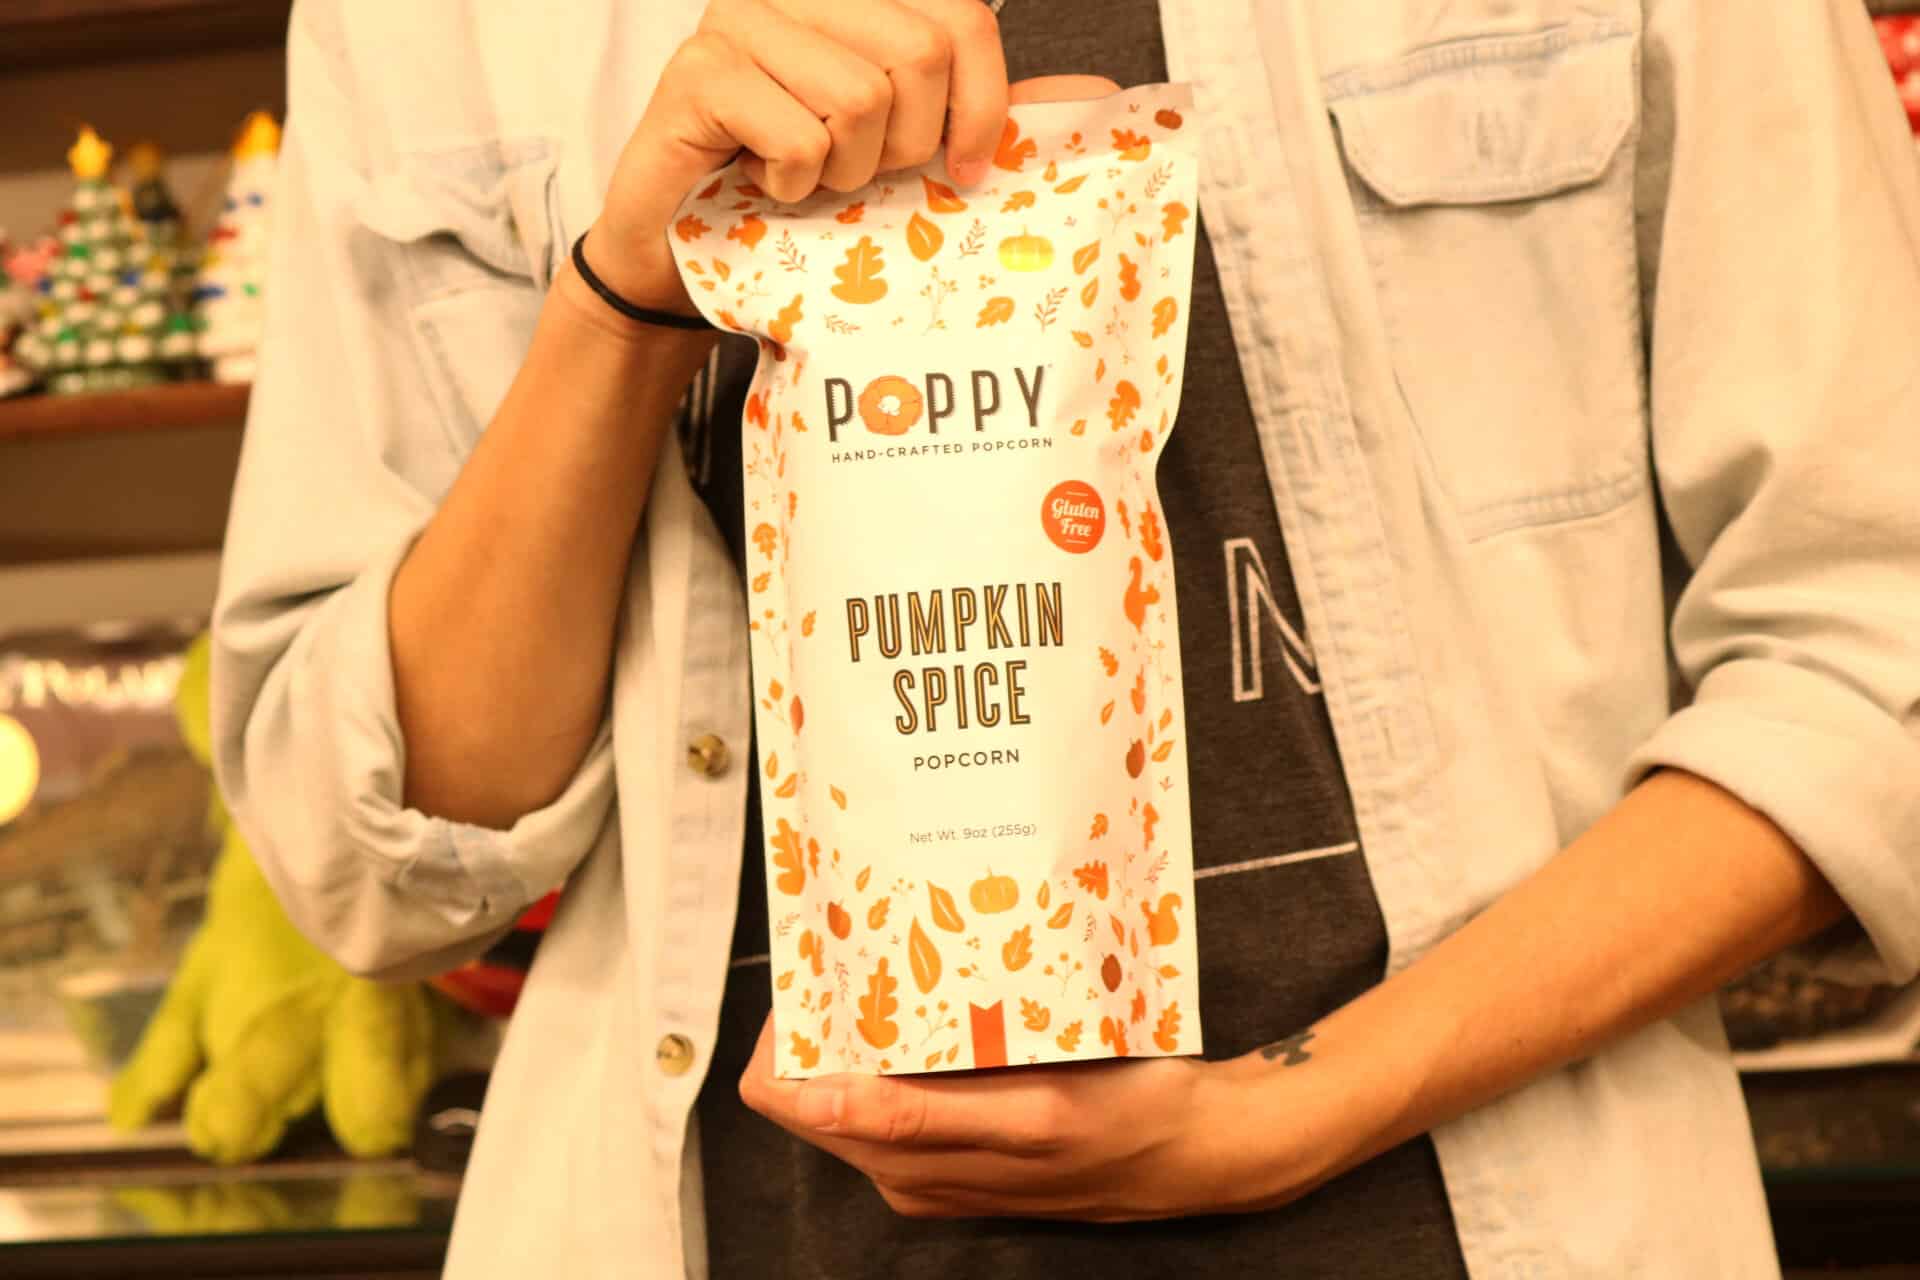 JP Waynick, sophomore worship studies major shows off his pumpkin spice popcorn that can found in the Mast General Store in Hendersonville, N.C.